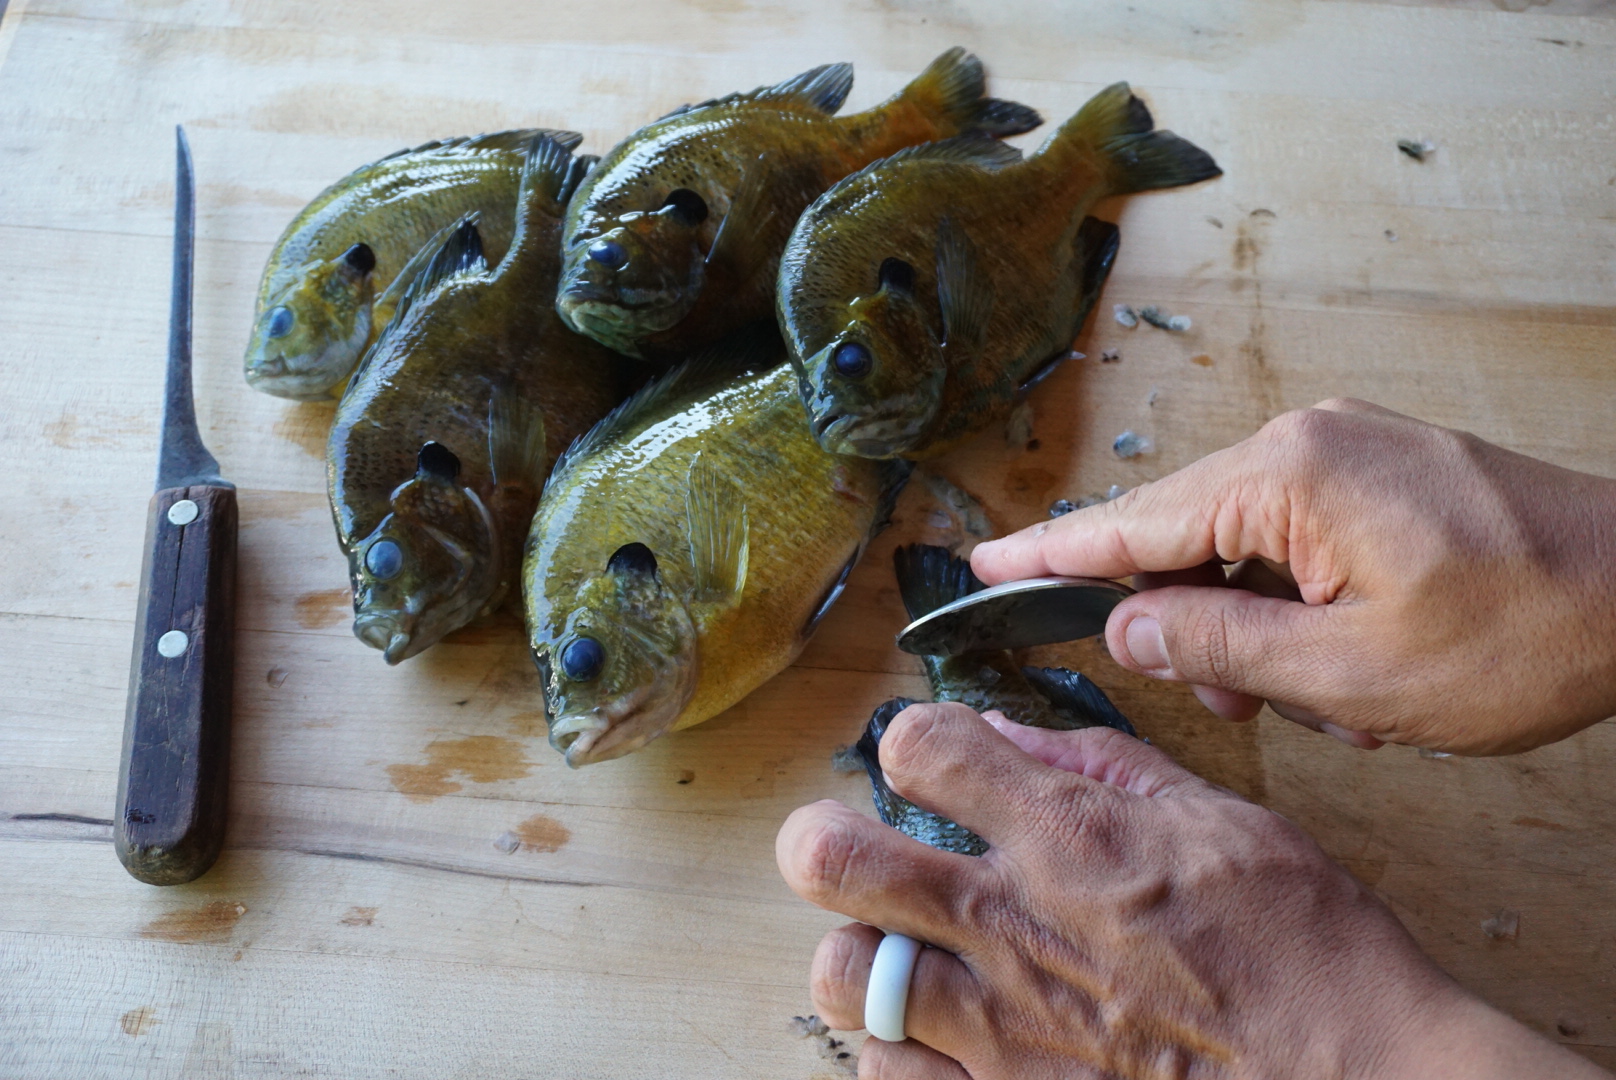 Descaling panfish might not be flashy, but it's a labor of love accomplished close to home..